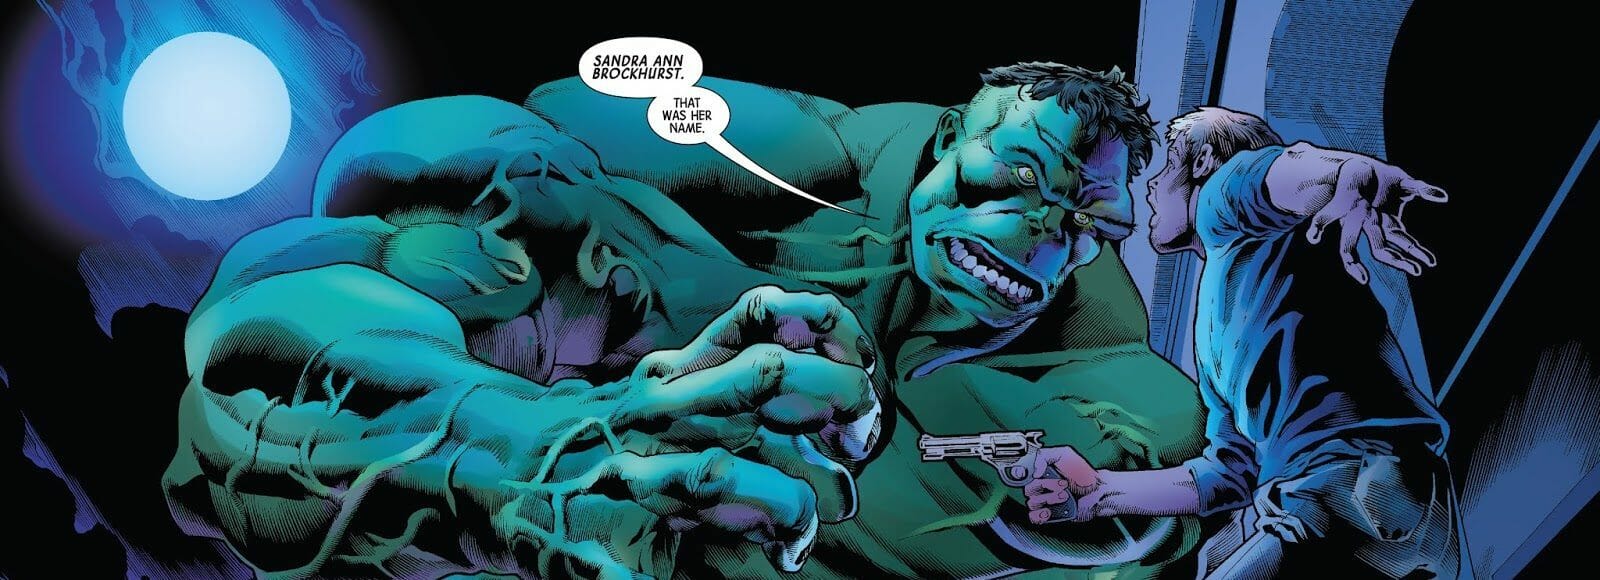 Immortal Hulk by Al Ewing is a psycho-religious story about forgiveness